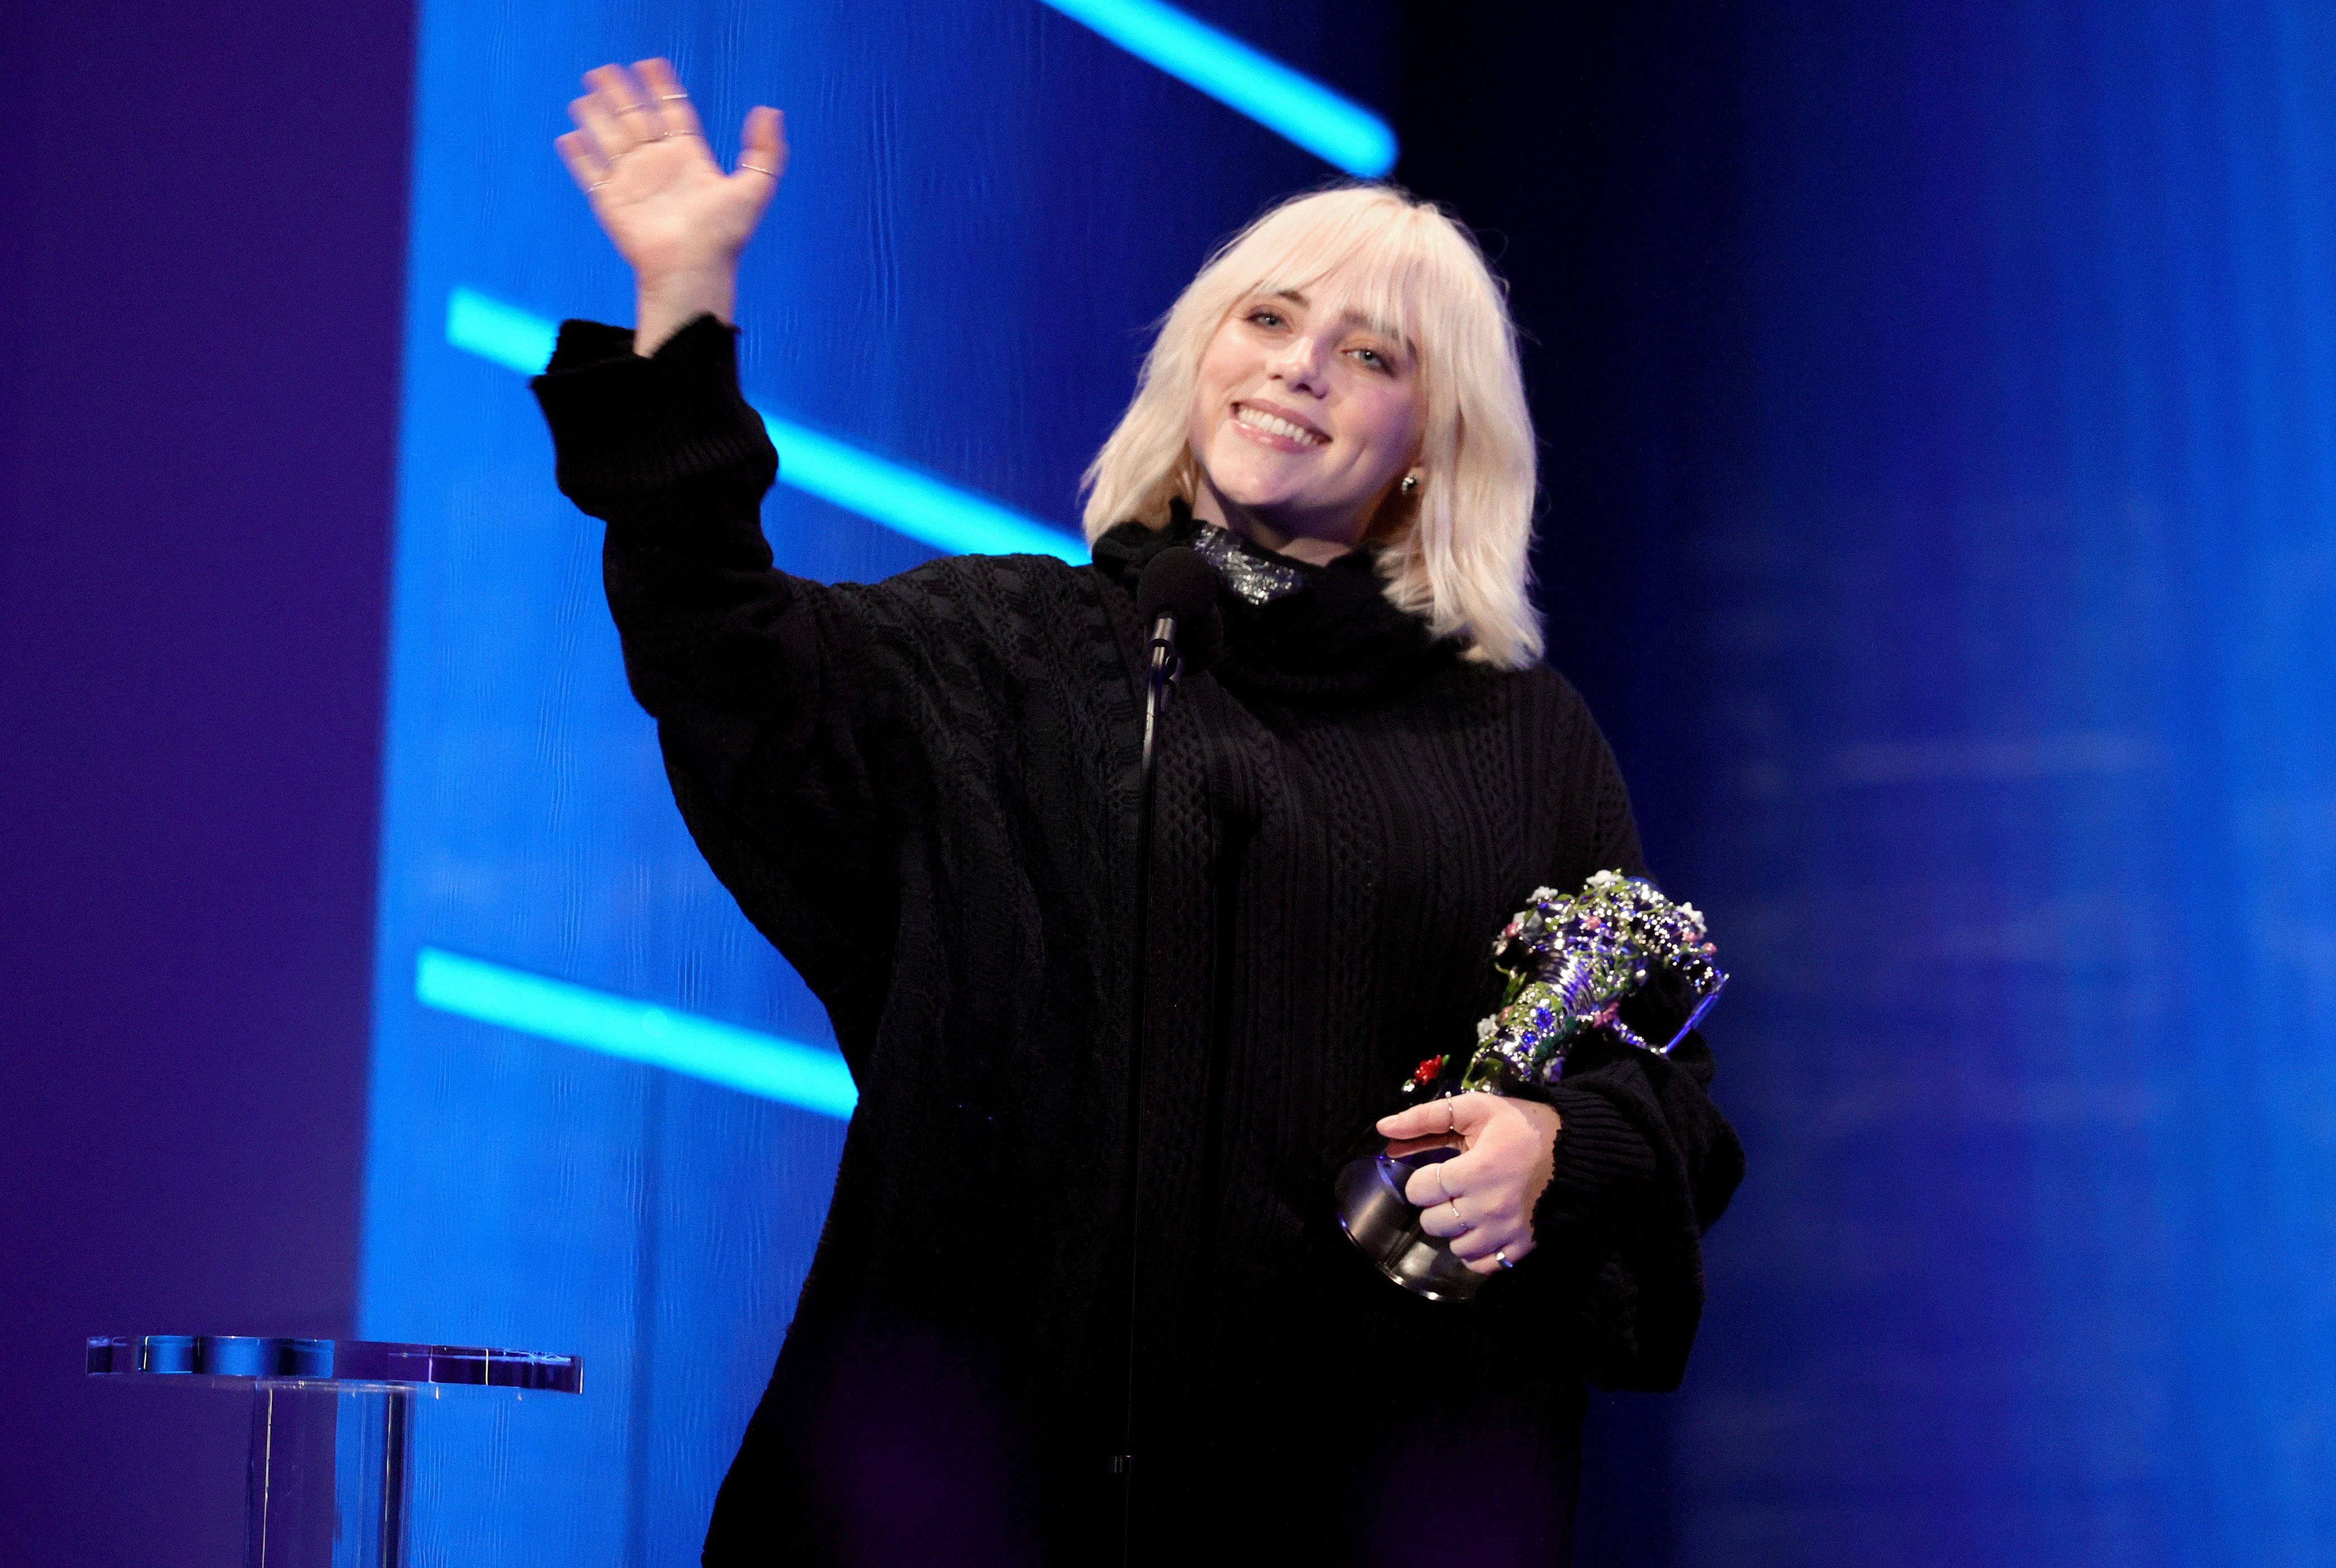 Billie Eilish accepts the Video for Good award for 'Your Power' onstage during the 2021 MTV Video Music Awards at Barclays Center on September 12, 2021 in the Brooklyn borough of New York City. She waves and smiles into the audience.